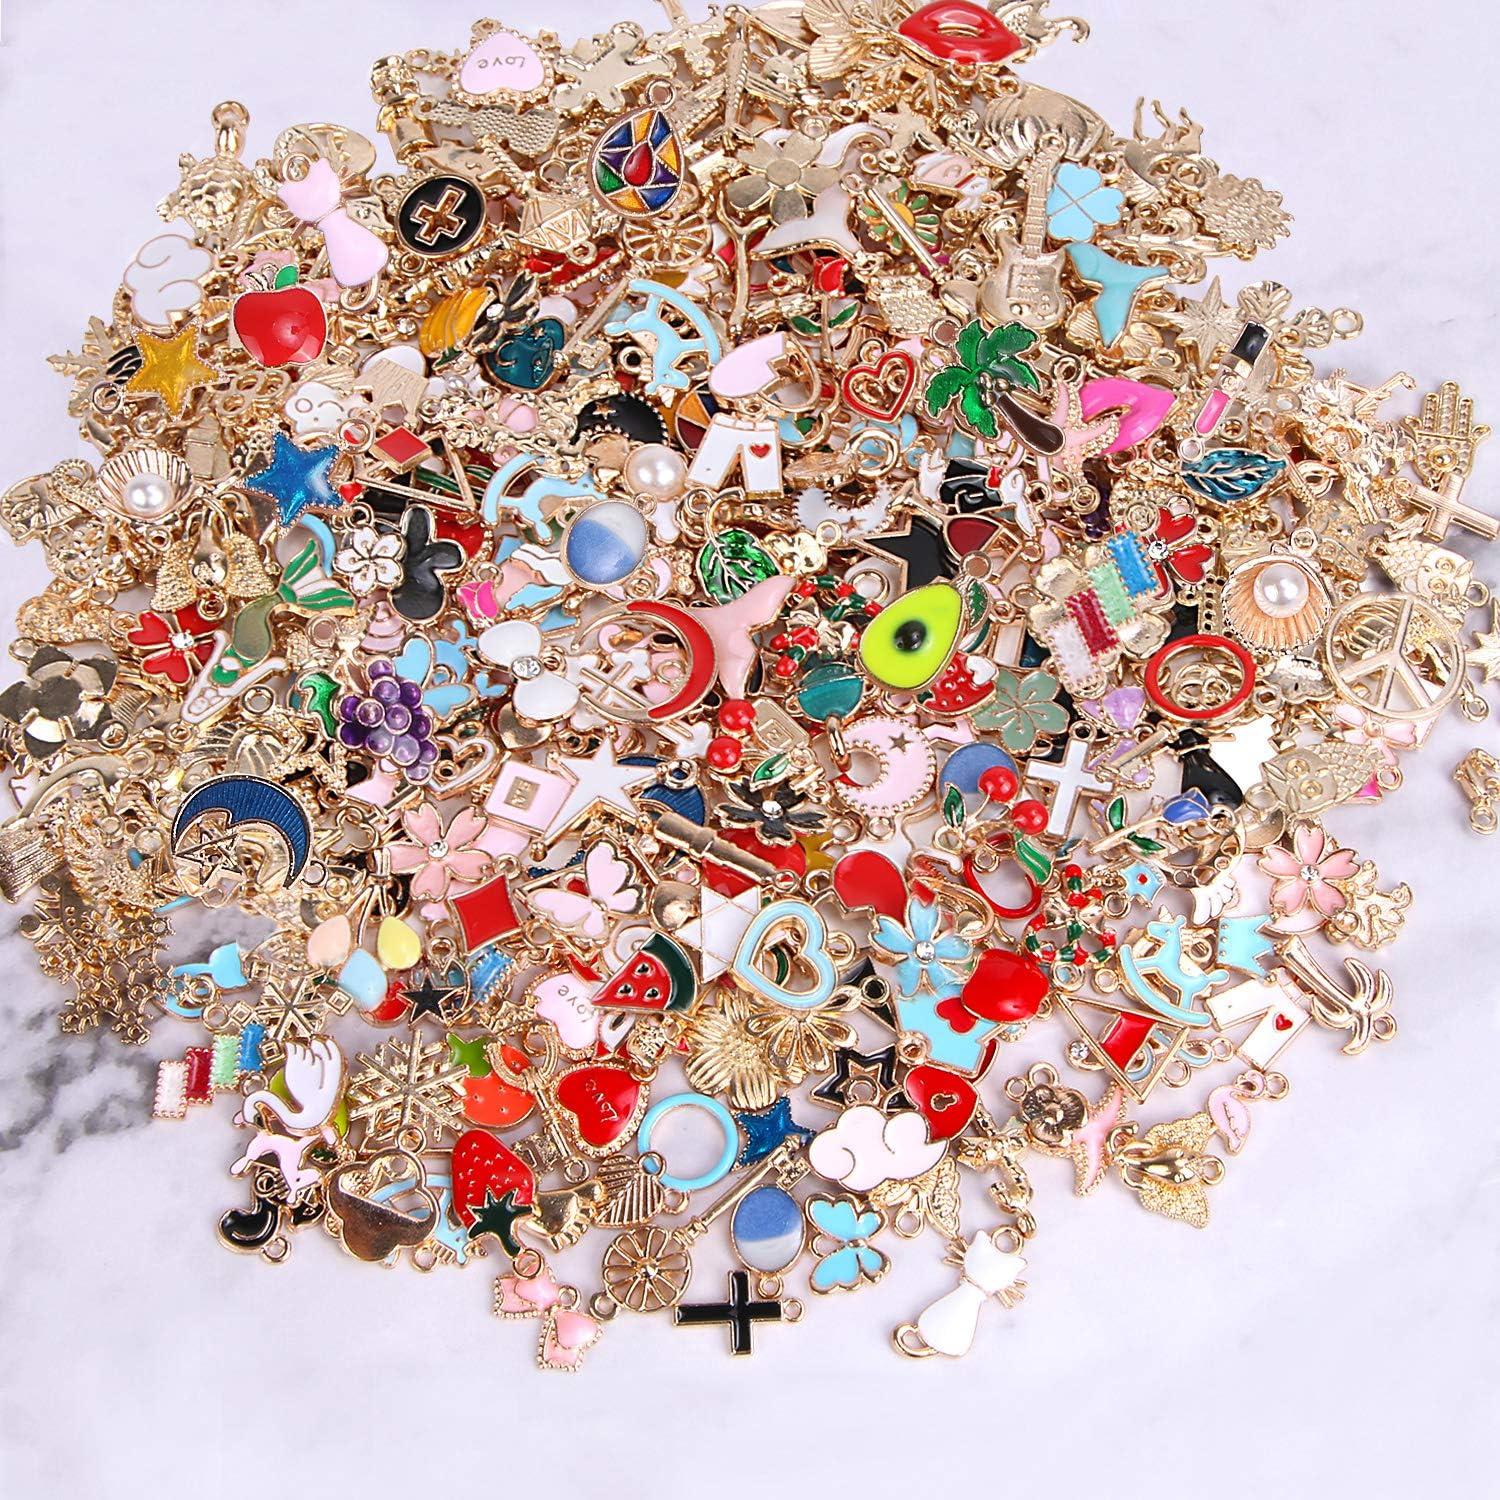 SANNIX 220pcs Assorted Gold Plated Enamel Charms Necklace Bracelet Pendants for Valentine's Day DIY Jewelry Making and Crafting